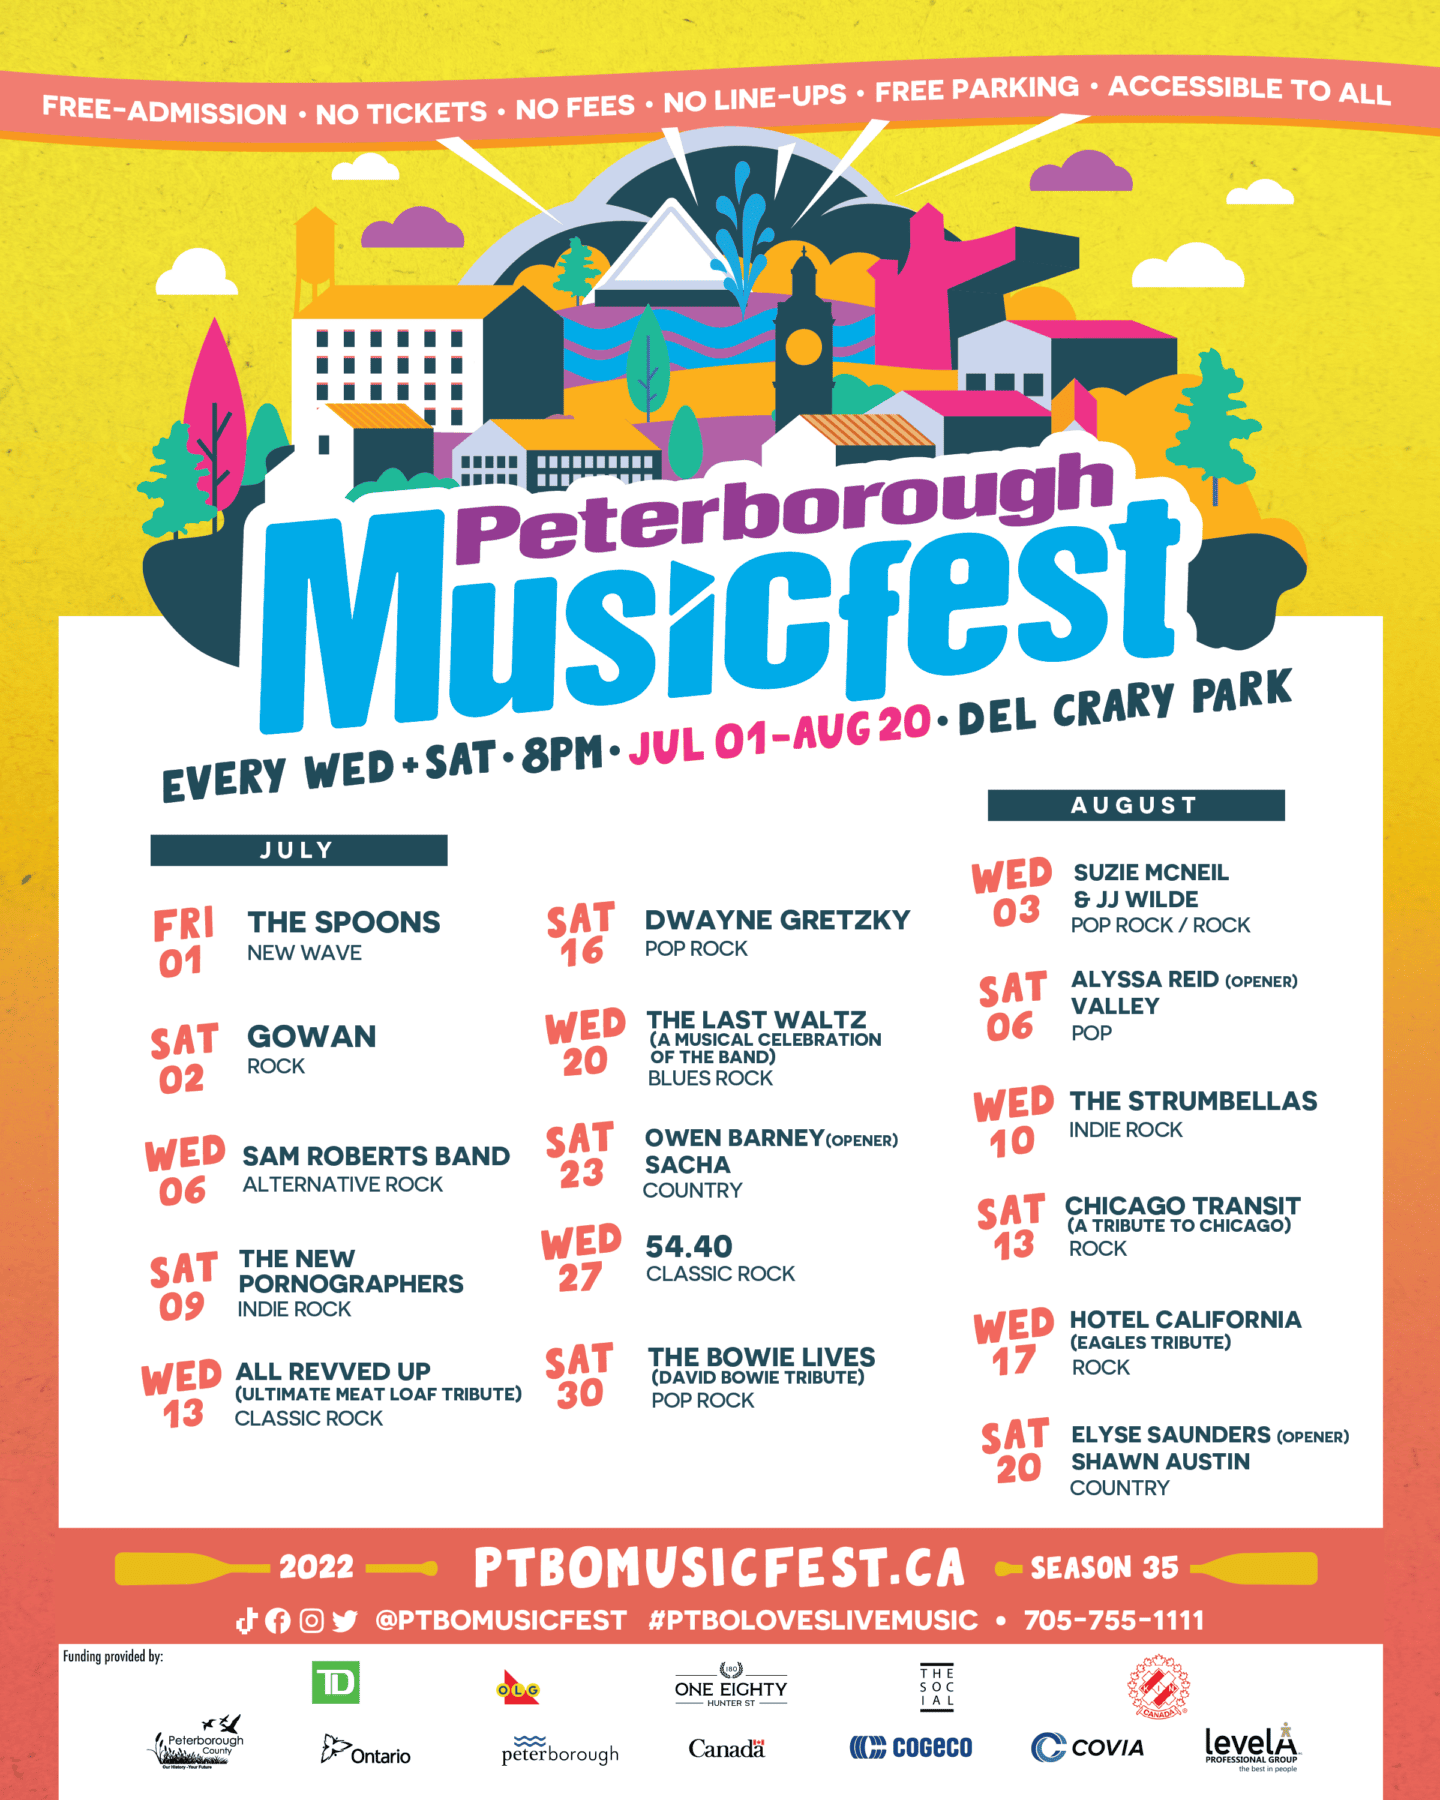 About Ptbo Musicfest